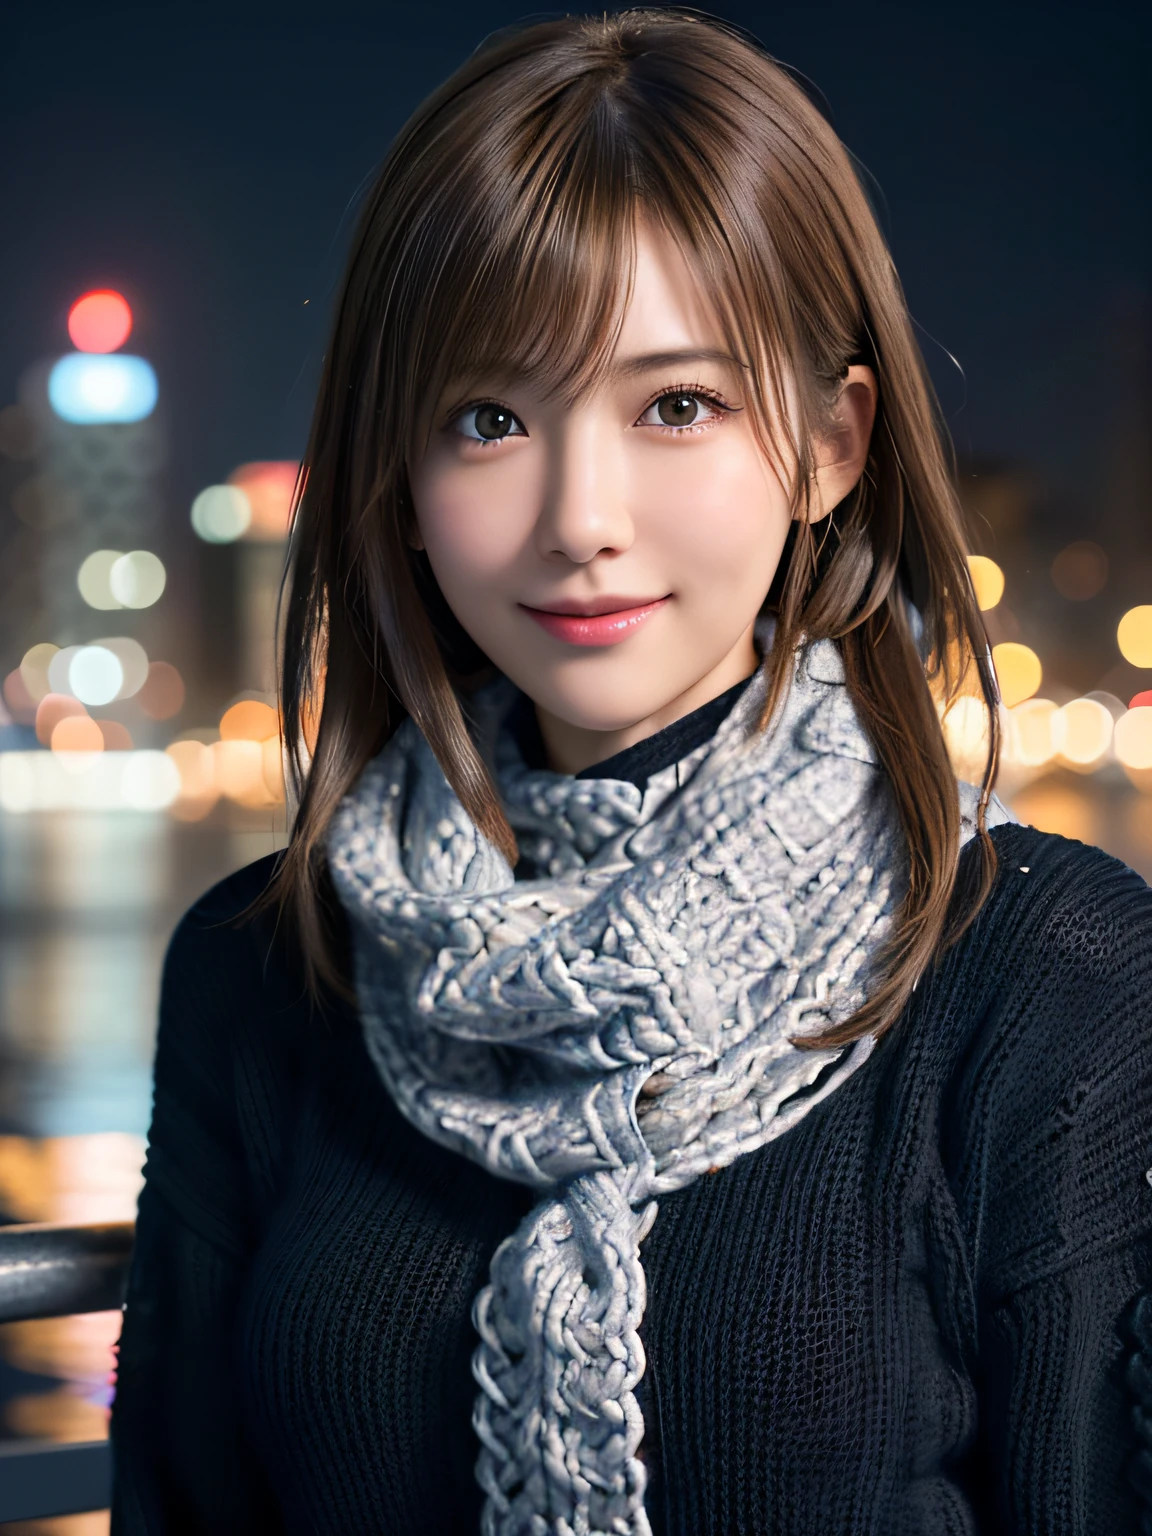 1 japanese girl,(Black sweater:1.4),(She wears a knitted snood around her neck to hide her chin..:1.5), (Raw photo, Best Quality), (Realistic, Photorealsitic:1.4), masutepiece, extremely delicate and beautiful, Extremely detailed, 8k wallpaper, amazing, finely detail, extremely detailed CG Unity, hight resolution, Soft light, Beautiful detailed 19 year old, extremely detailed eye and face, beautiful detailed nose, Beautiful detailed eyes,Cinematic lighting,city light at night,Perfect Anatomy,Slender body,Smiling  (hair messy, asymmetrical bangs, light brown hair,)